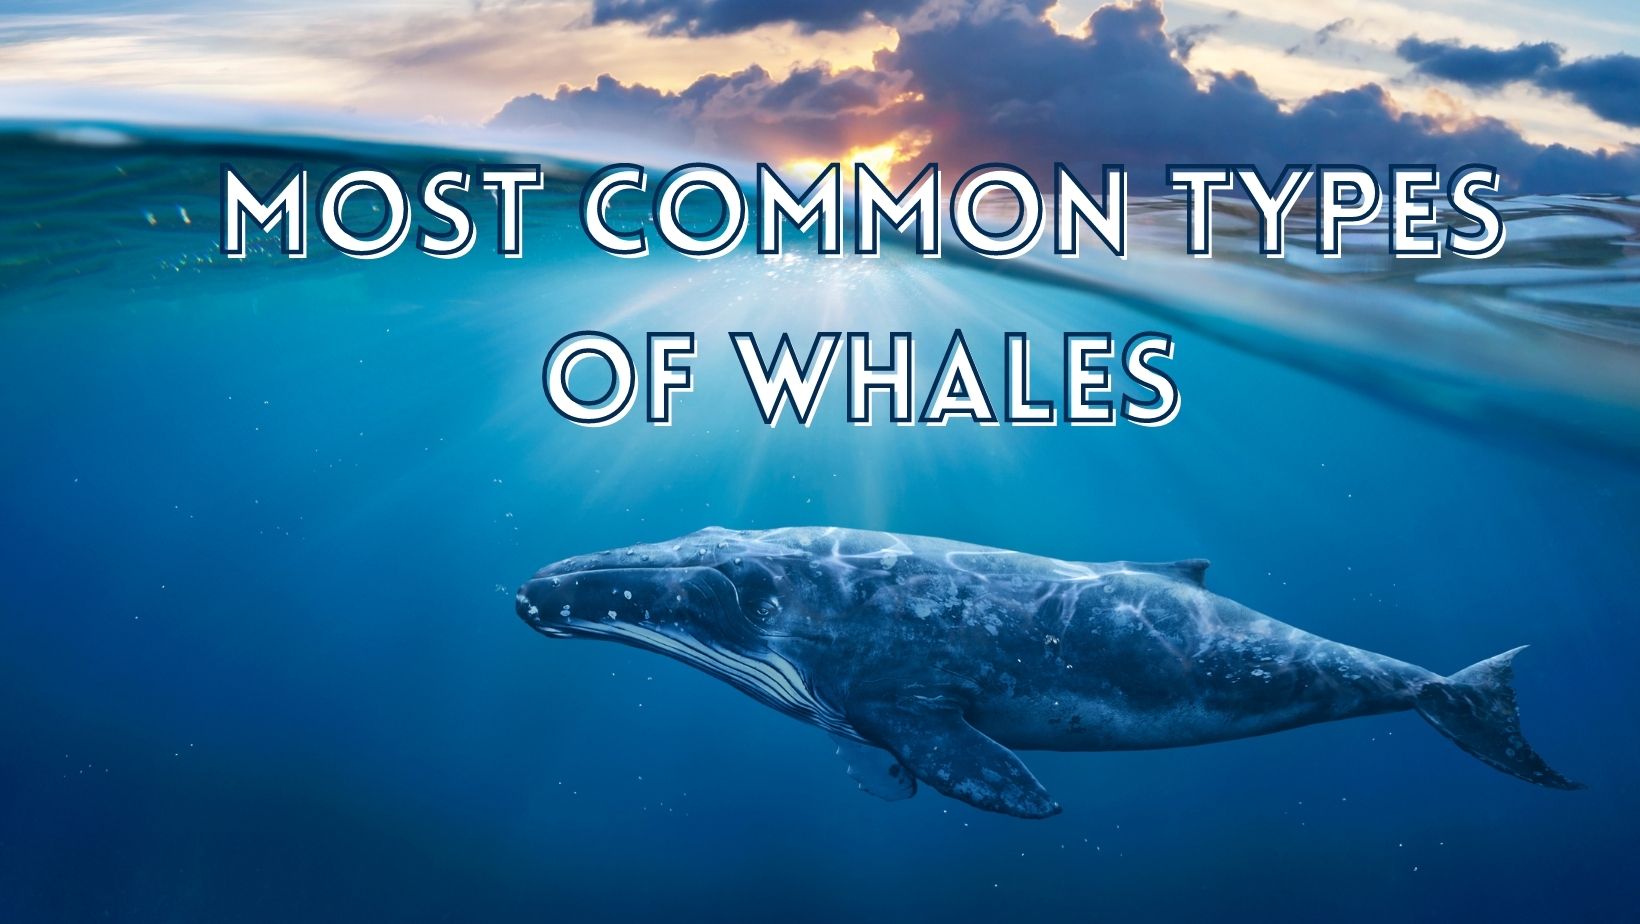 Most interesting types of whales